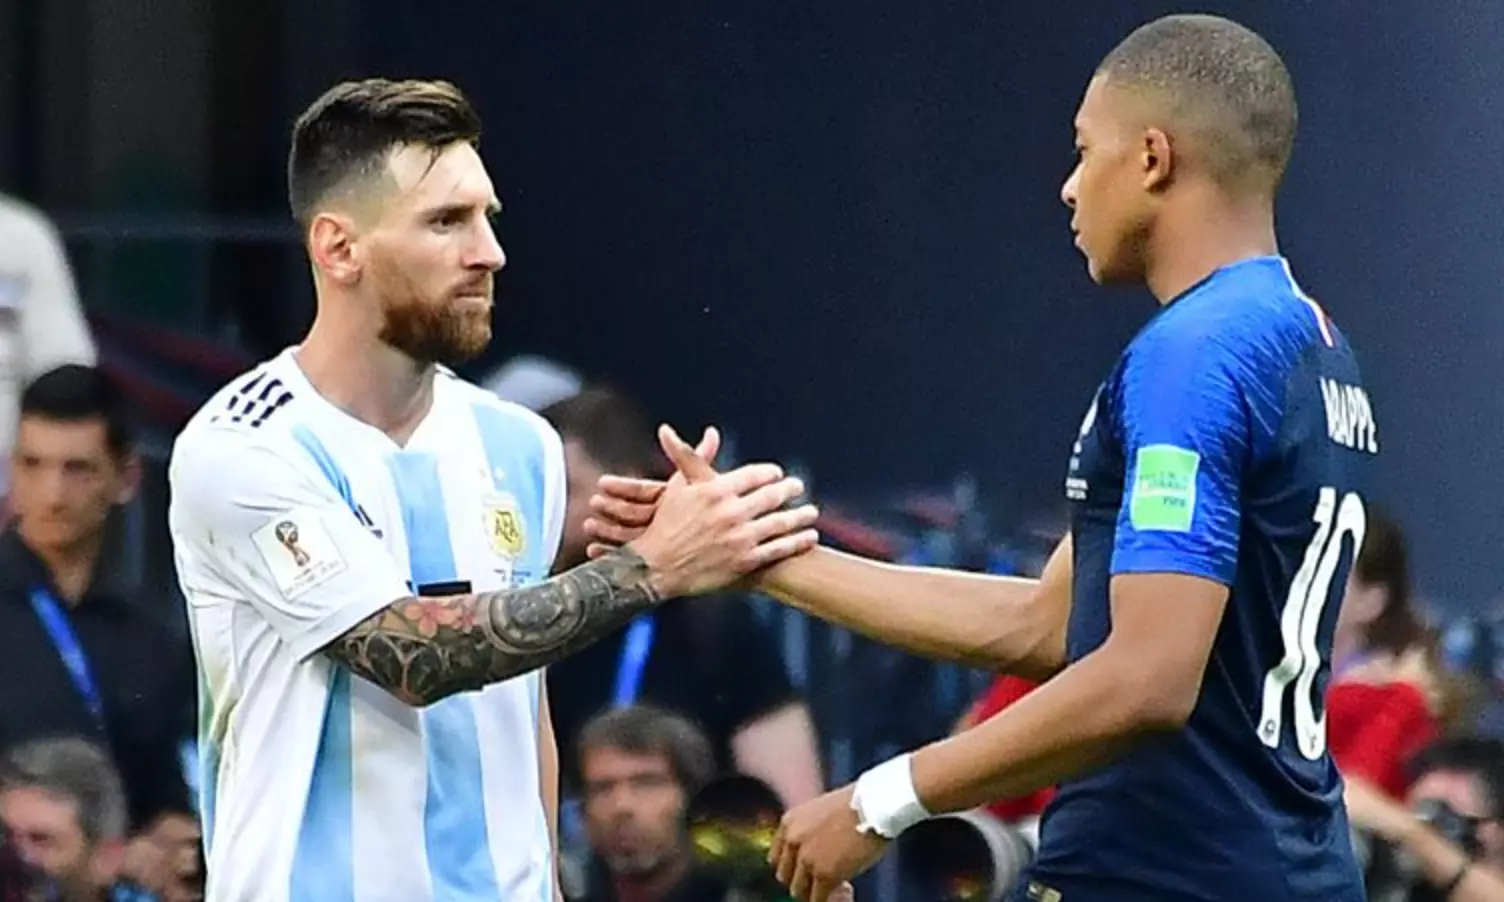 Last Dance: Ronaldo, Messi likely playing at last World Cup